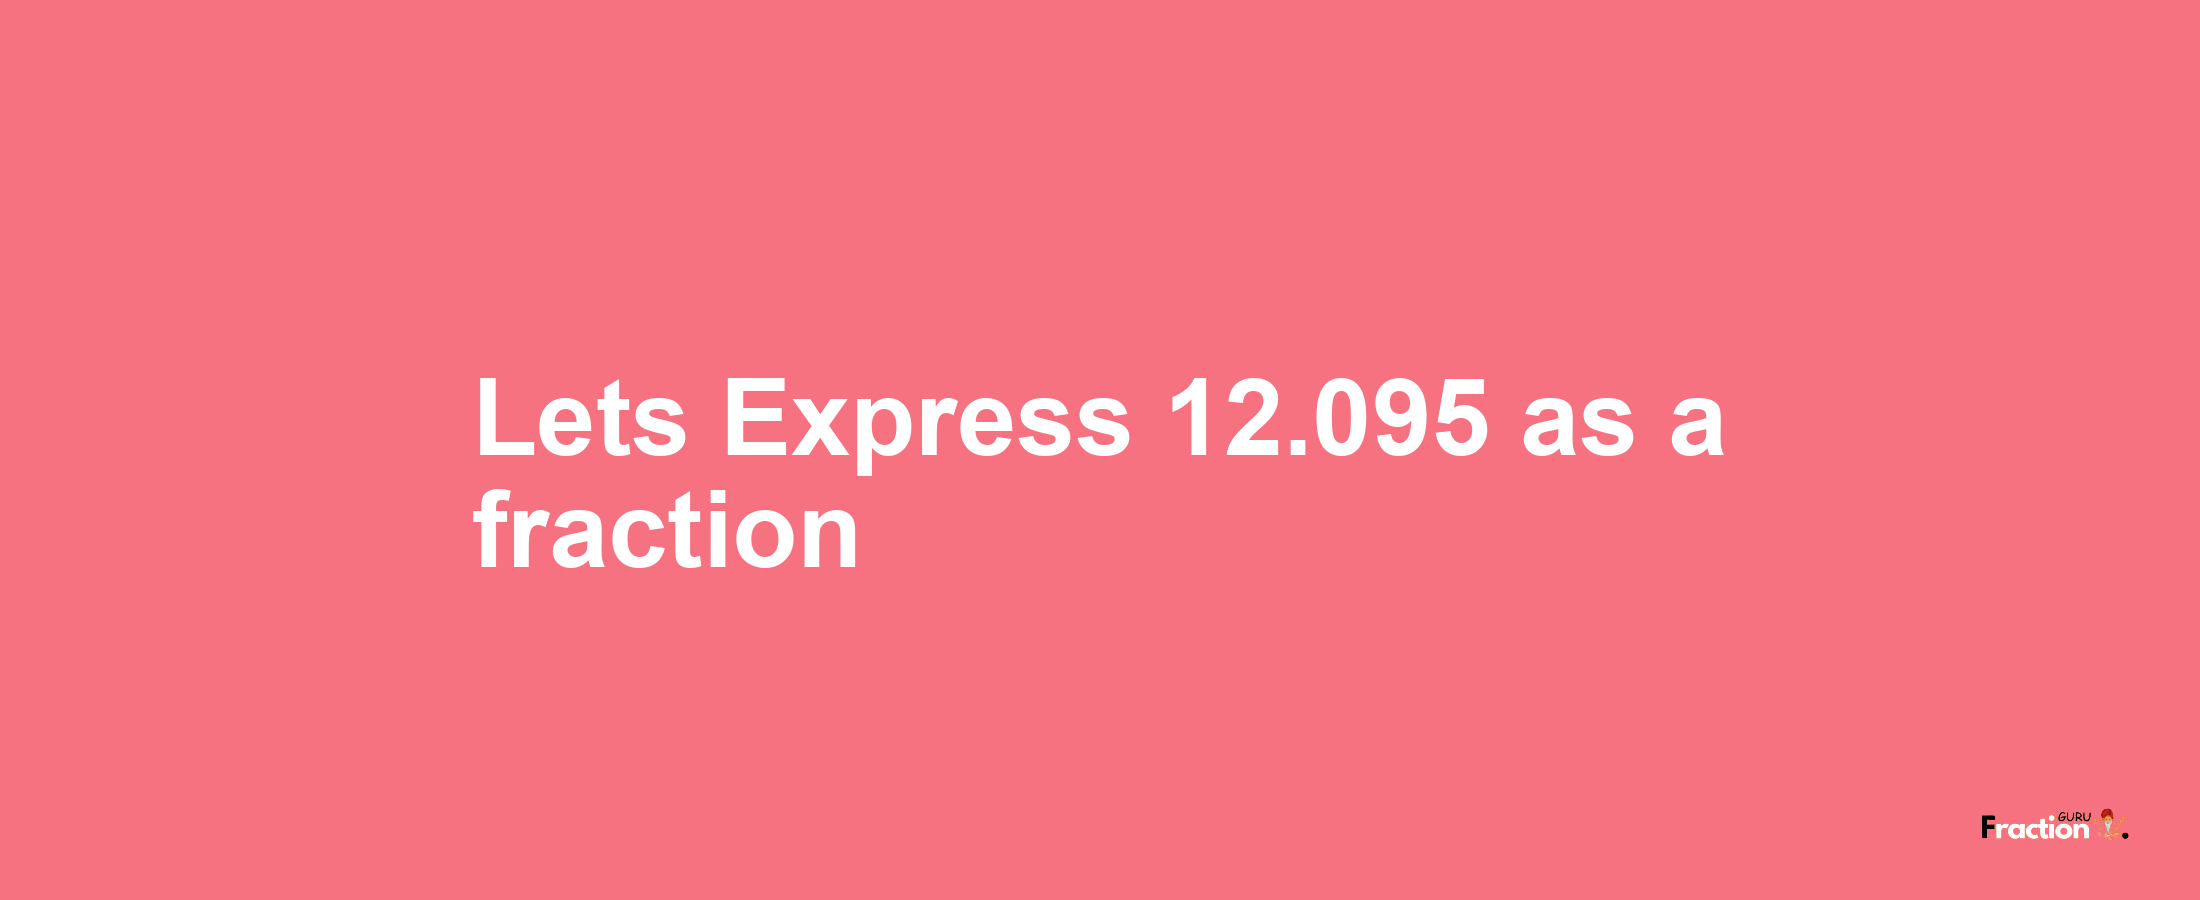 Lets Express 12.095 as afraction